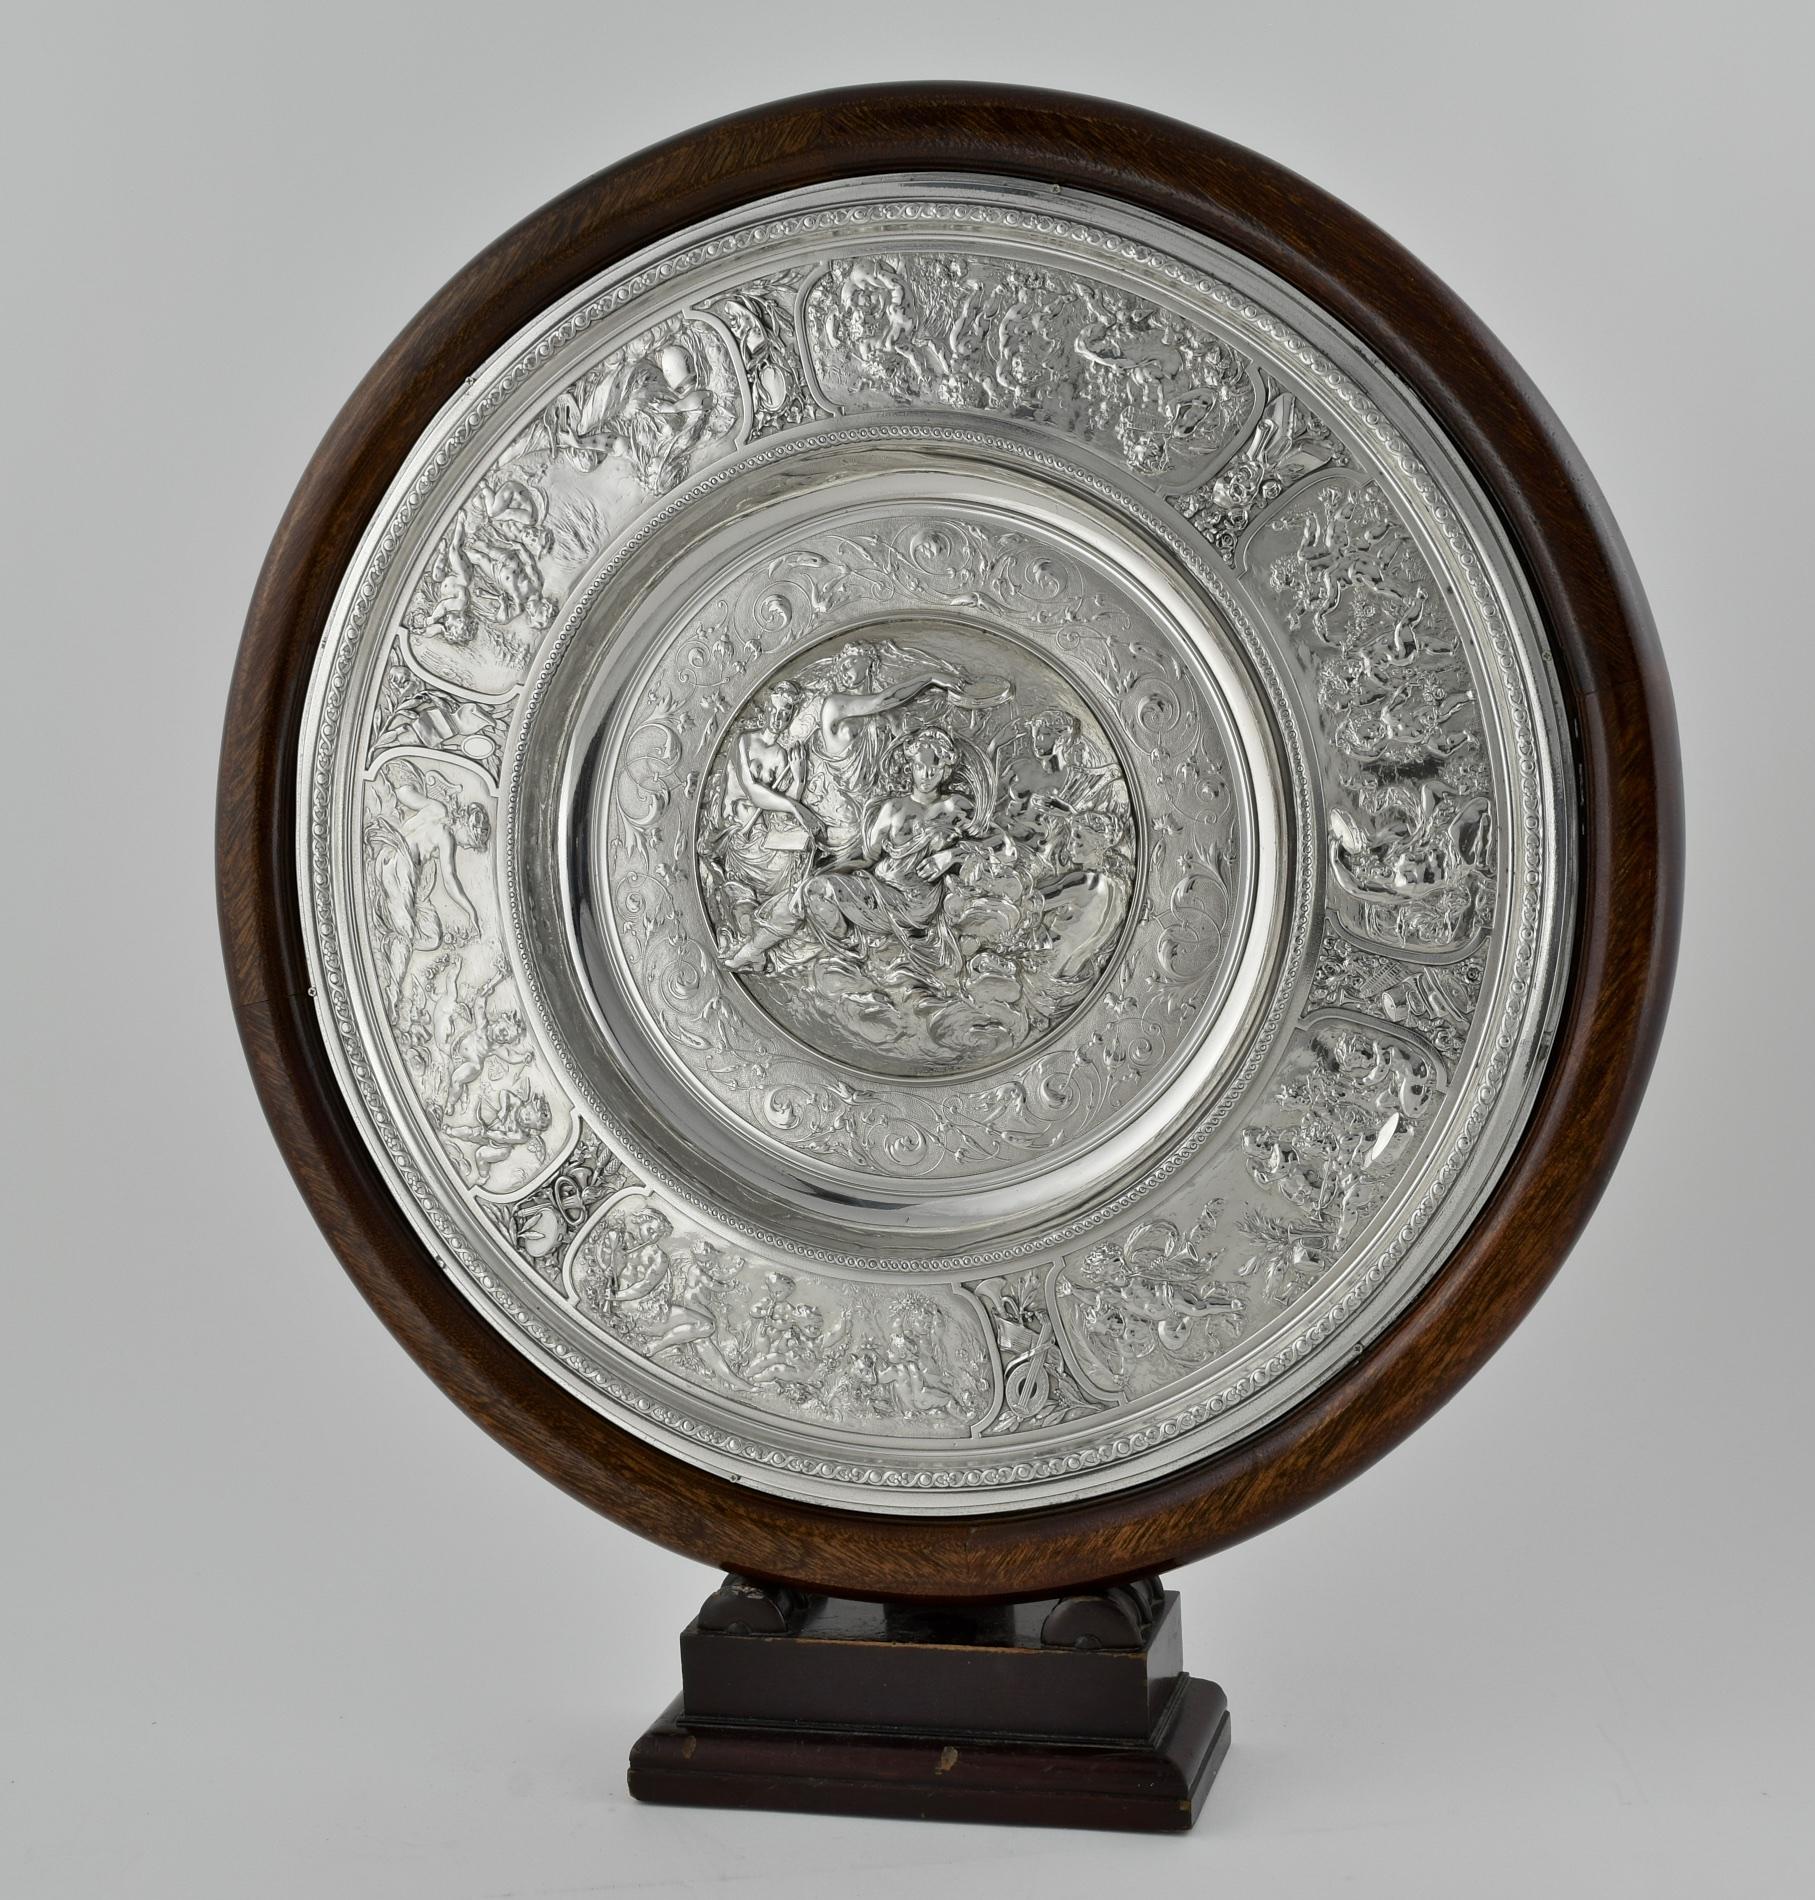 A shield by Elkington & Co decorated with classical scenes. The centre is embellished with classical female figures playing musical instruments. Continuing with the musical motif, around the edge  of the shield is decorated with scenes of musicians